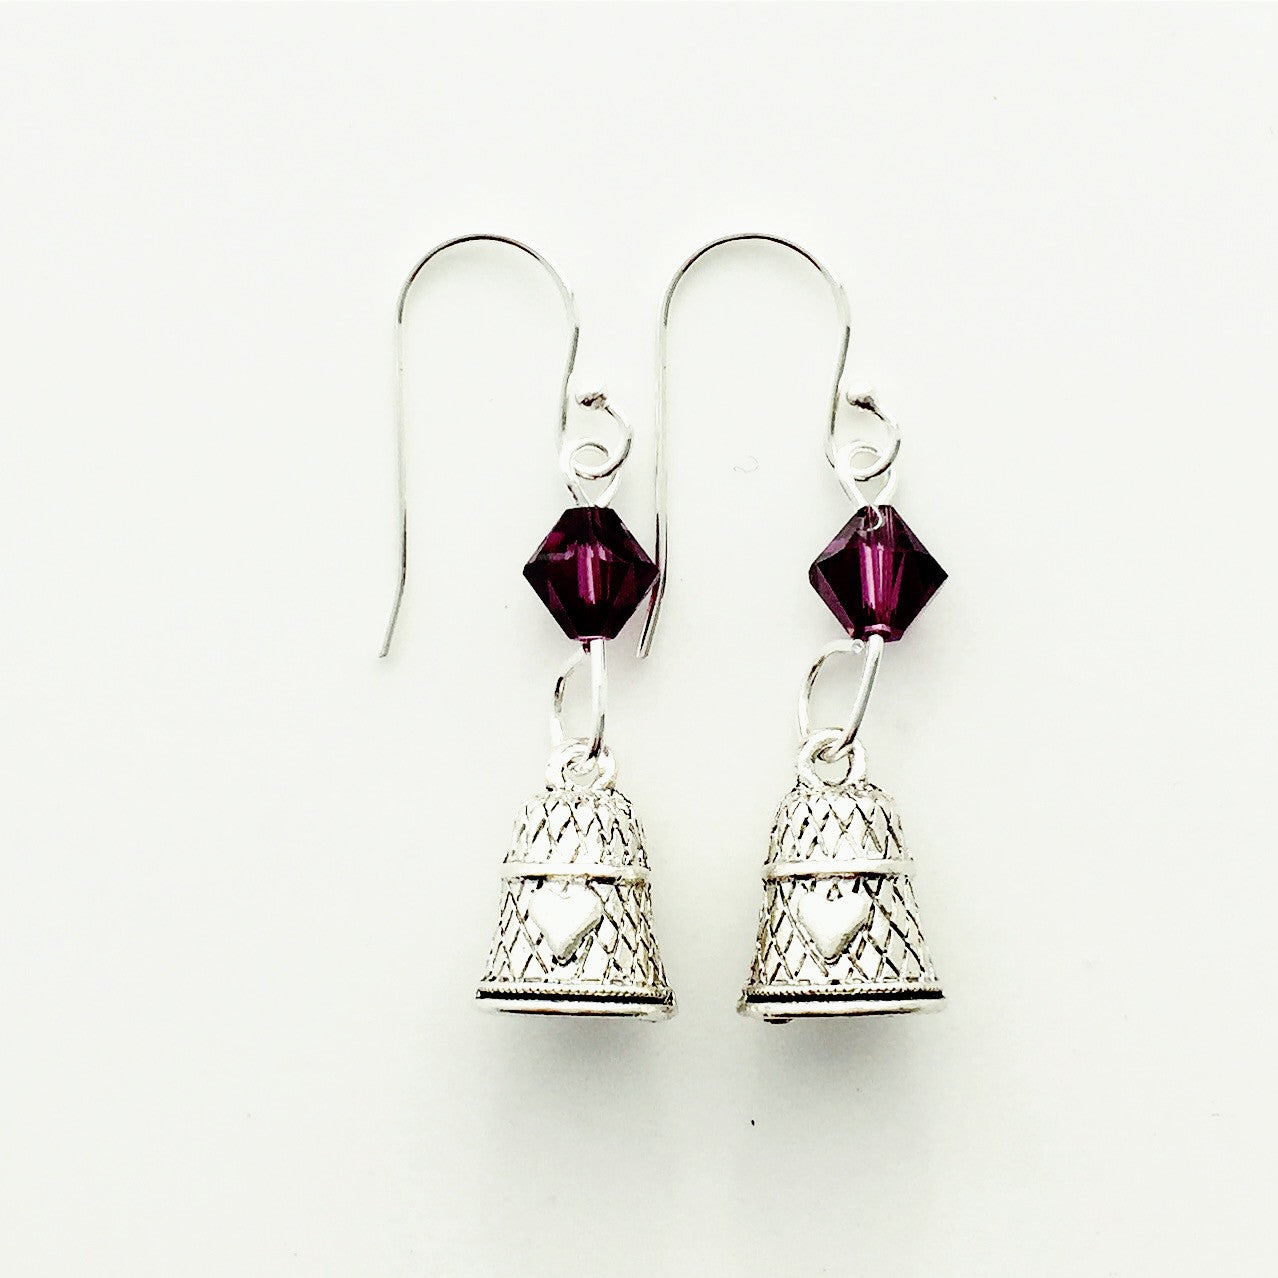 ____ Thimble Silver Earrings with Purple Swarovski Crystals.